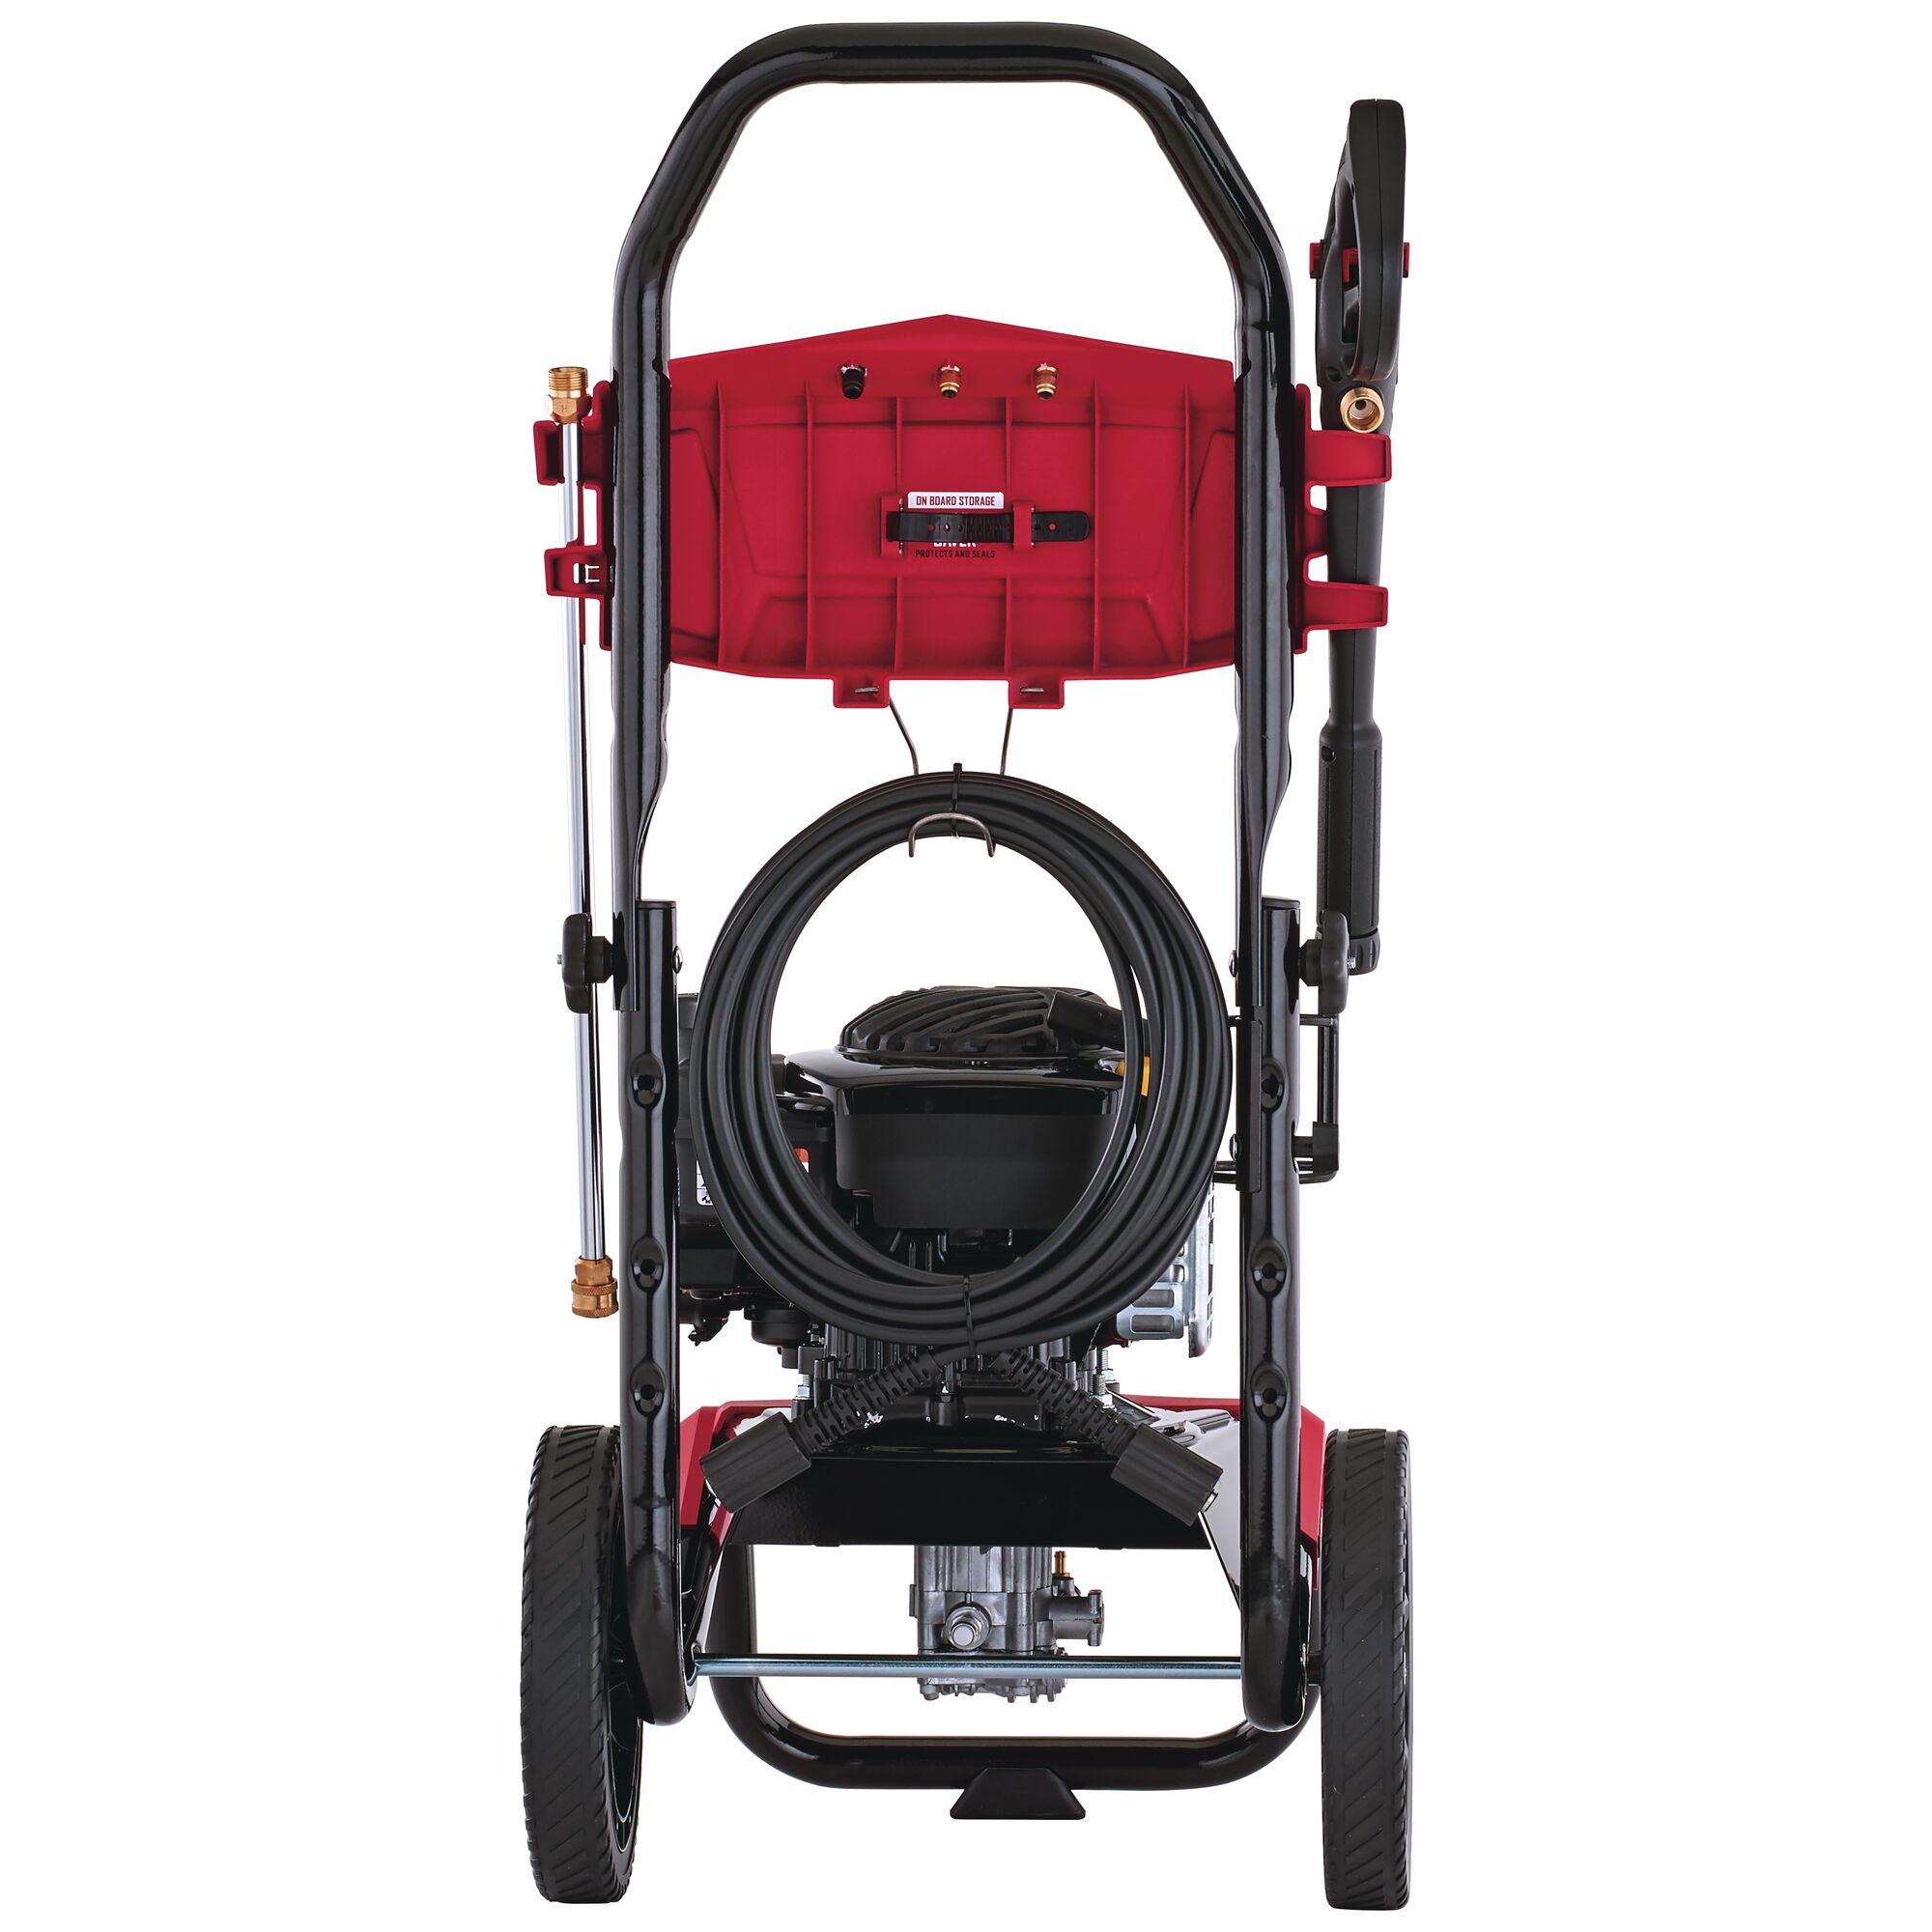 Backside of 2200 MAX Pounds per Square Inch or 2 MAX Gallons Per Minute Pressure Washer.